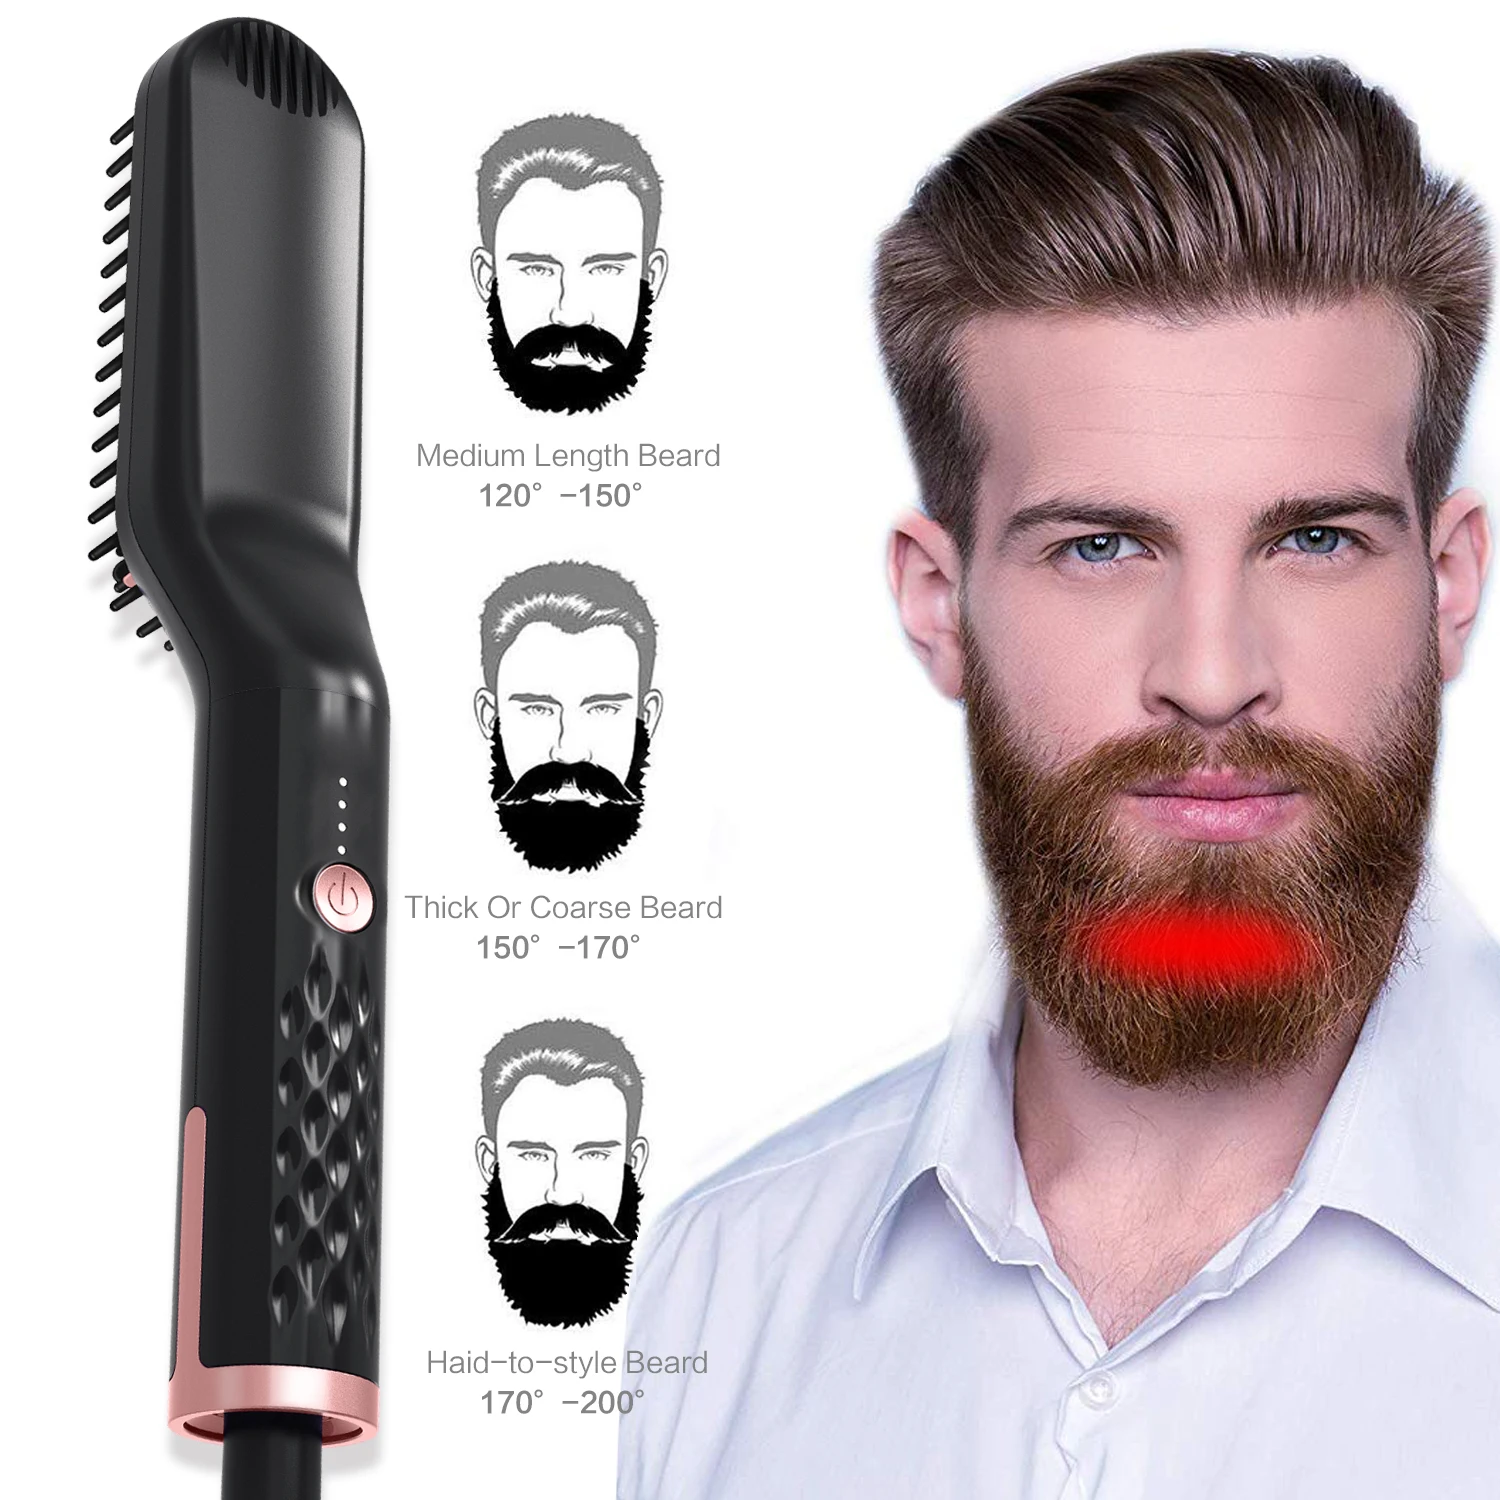 

Beard Straighteners Comb New Electric Hair Curling Curler Brush Wet and Dry Dual Use Anti-Scald Ceramic Ionic Hair Brush, Blue or customized color